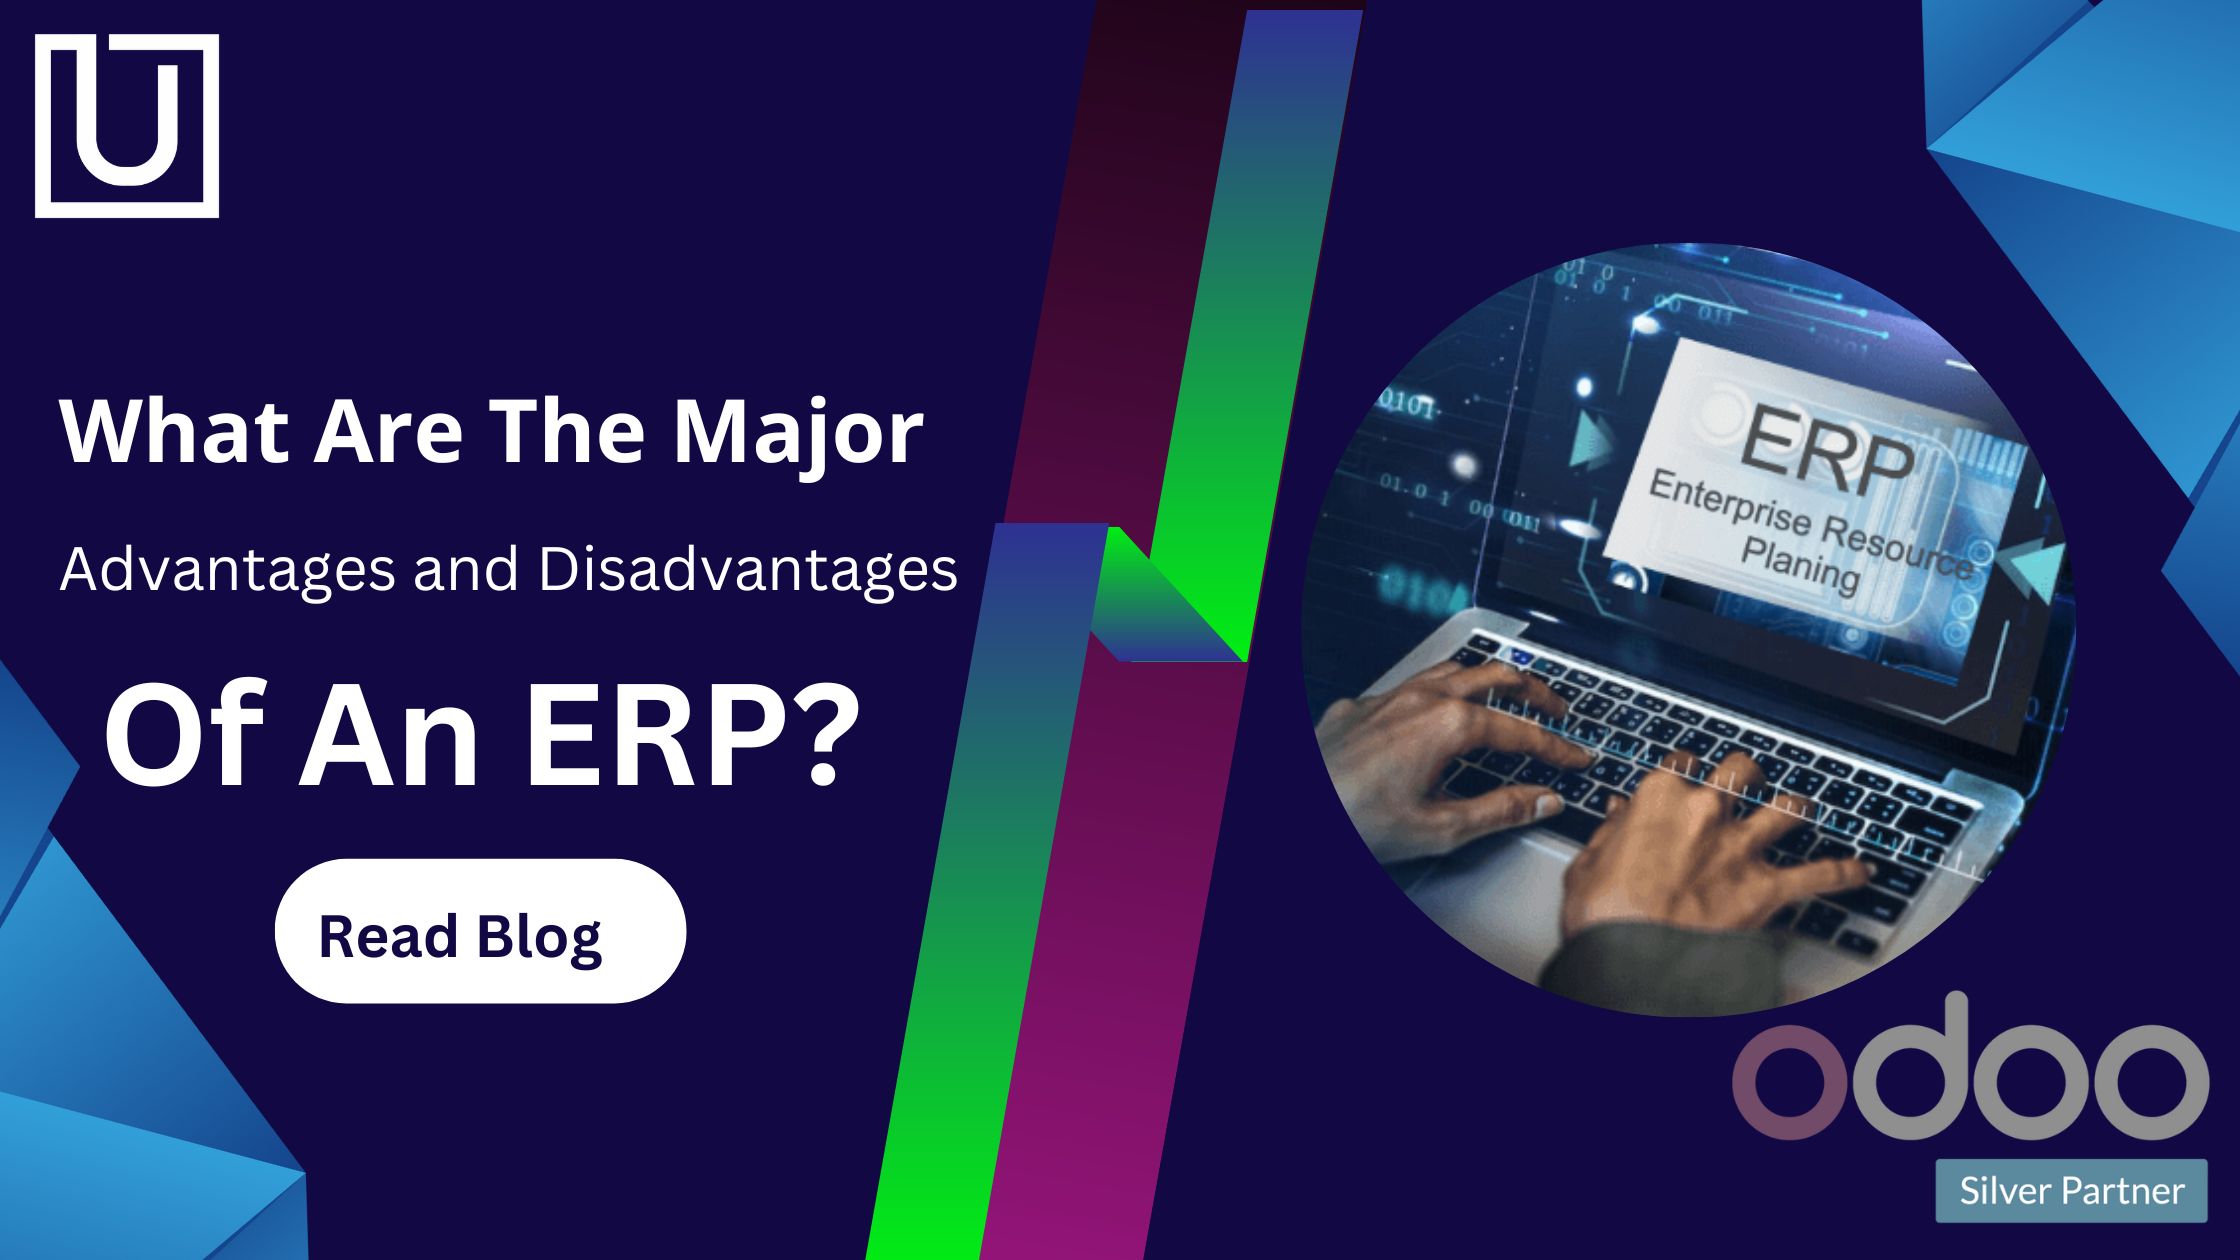 What are the major advantages and disadvantages of an ERP?